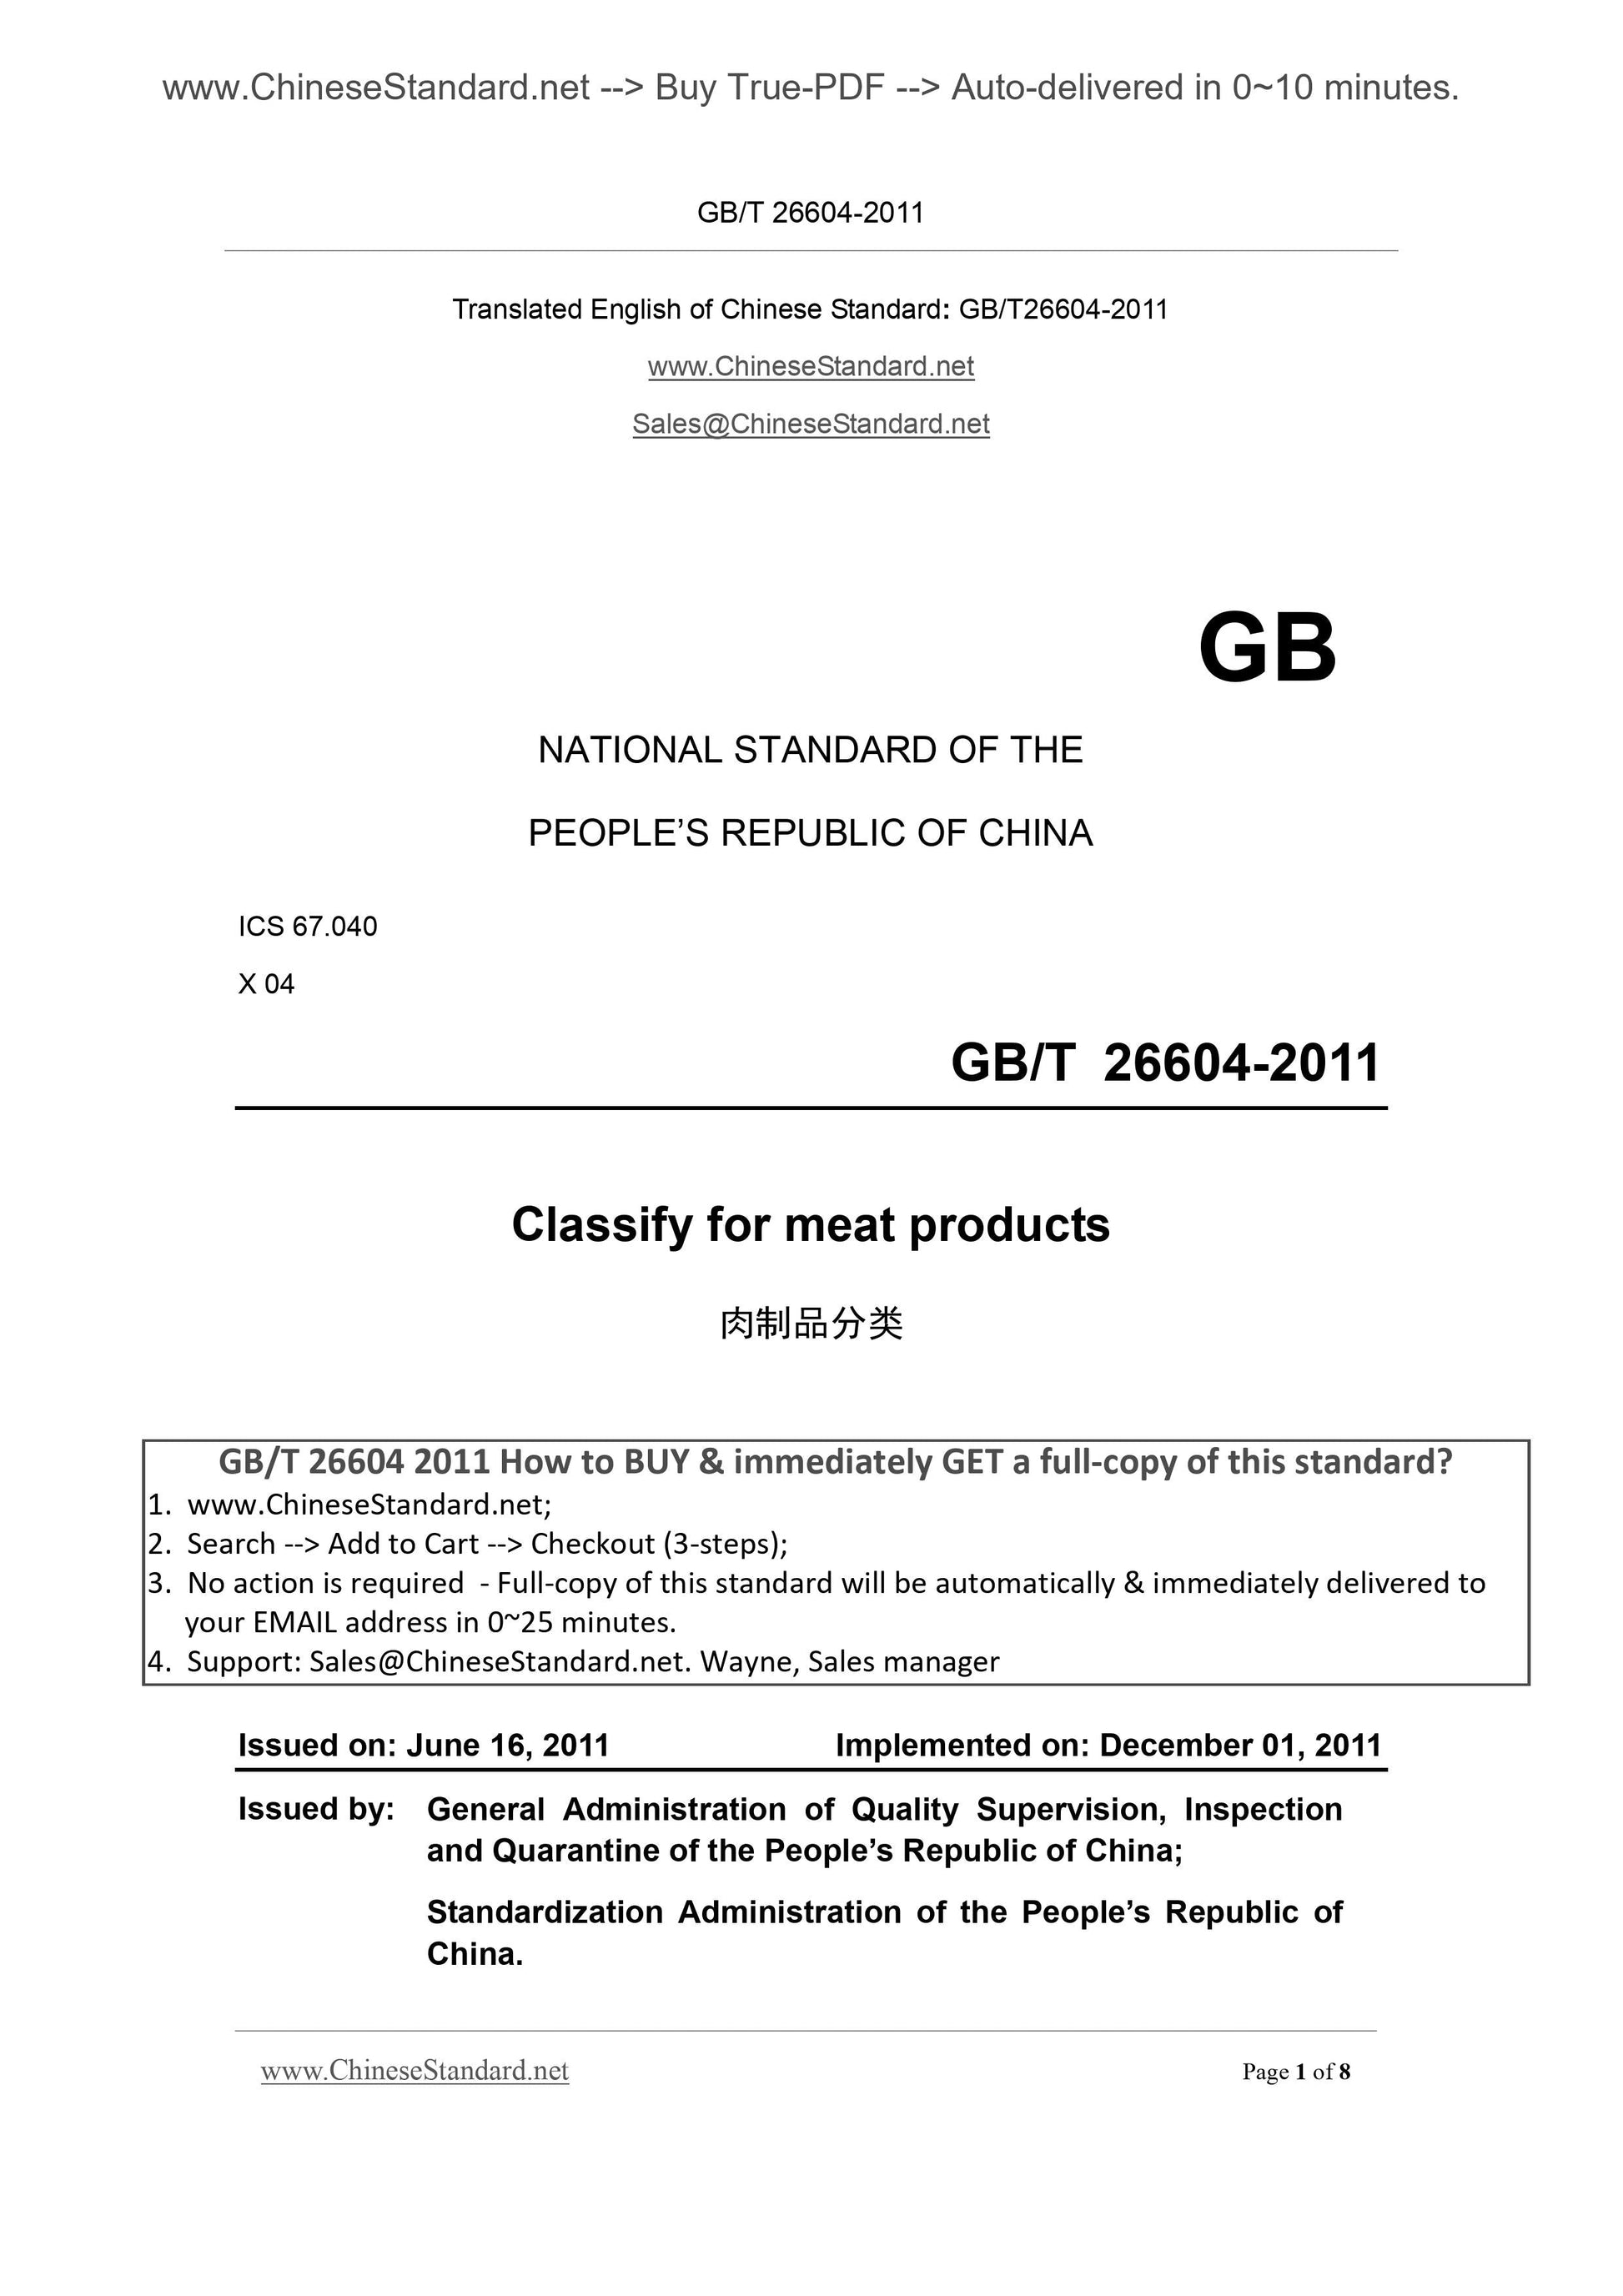 GB/T 26604-2011 Page 1